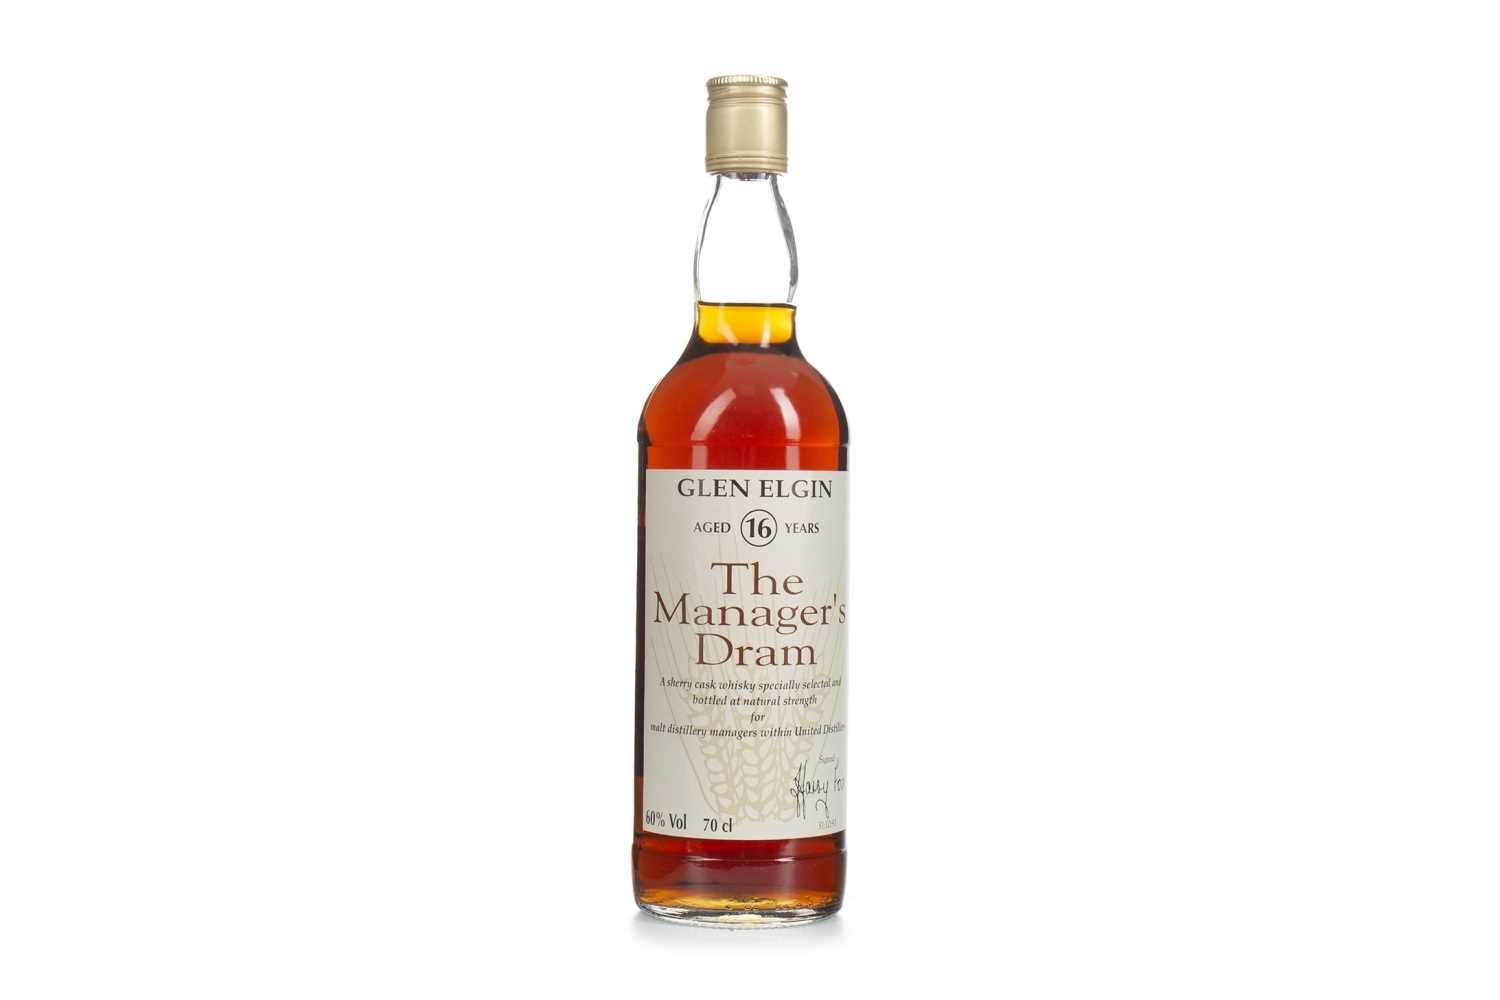 Lot 10 - GLEN ELGIN MANAGERS DRAM AGED 16 YEARS